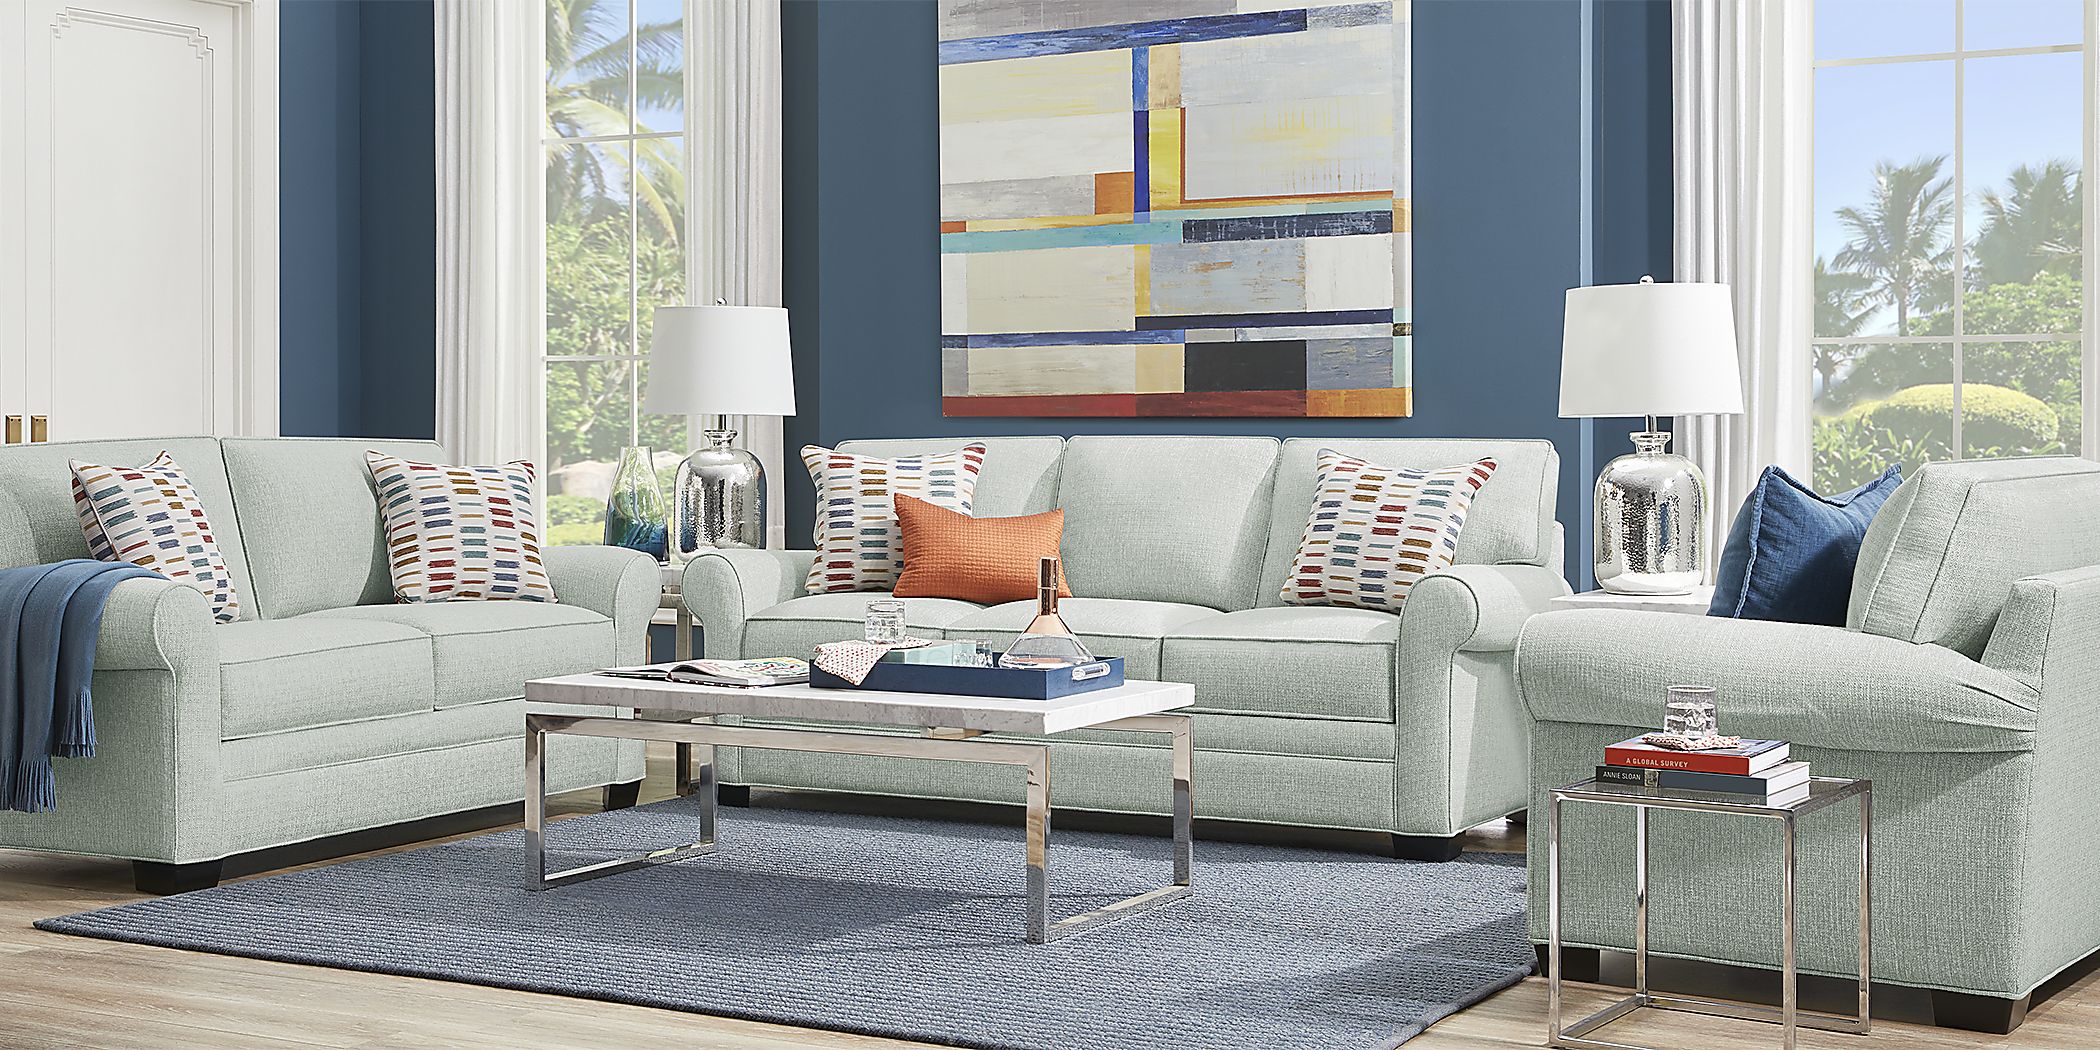 Cindy Crawford Home Bellingham Willow Green Textured Sofa